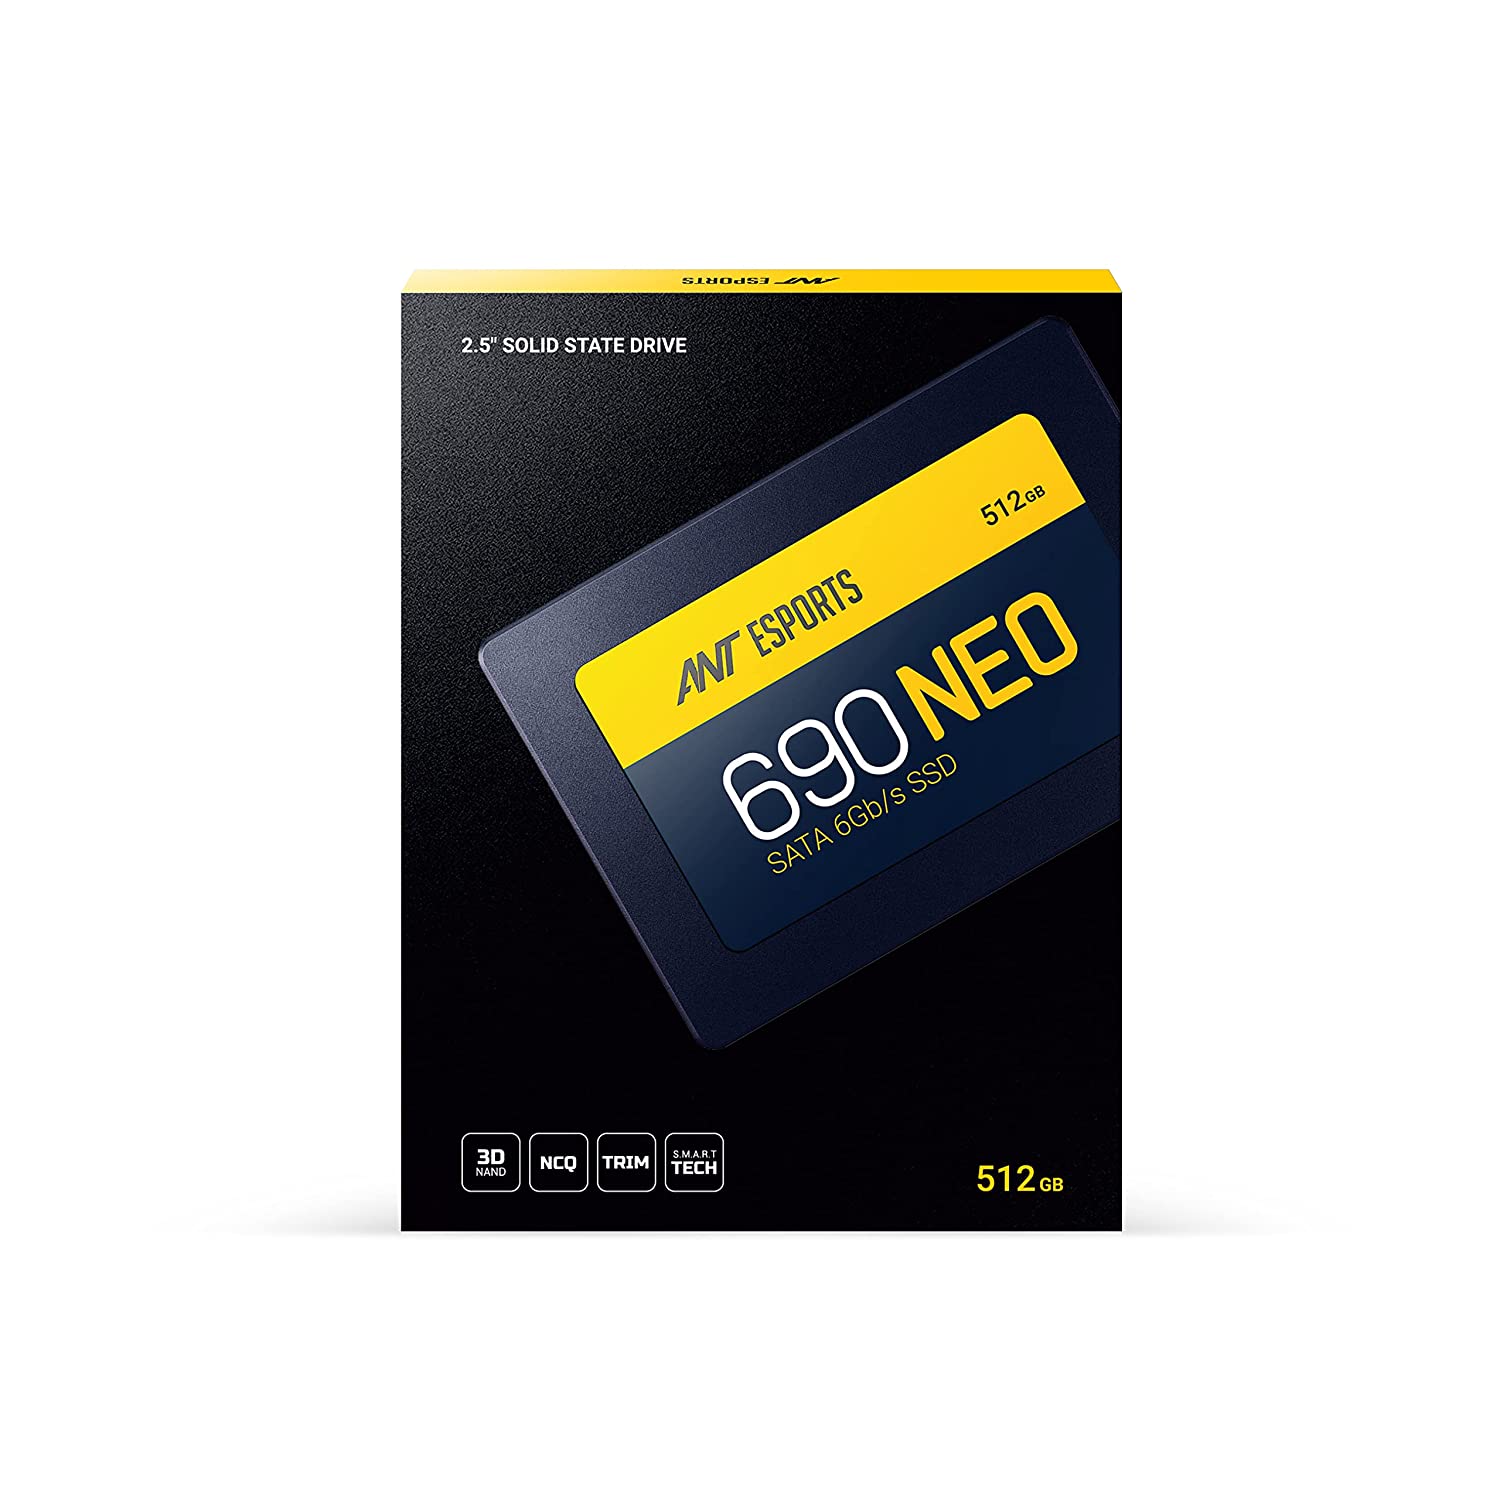 ANT Esports Neo 690 Sata SSD 512GB SSD,Ultra Low Power Consumption